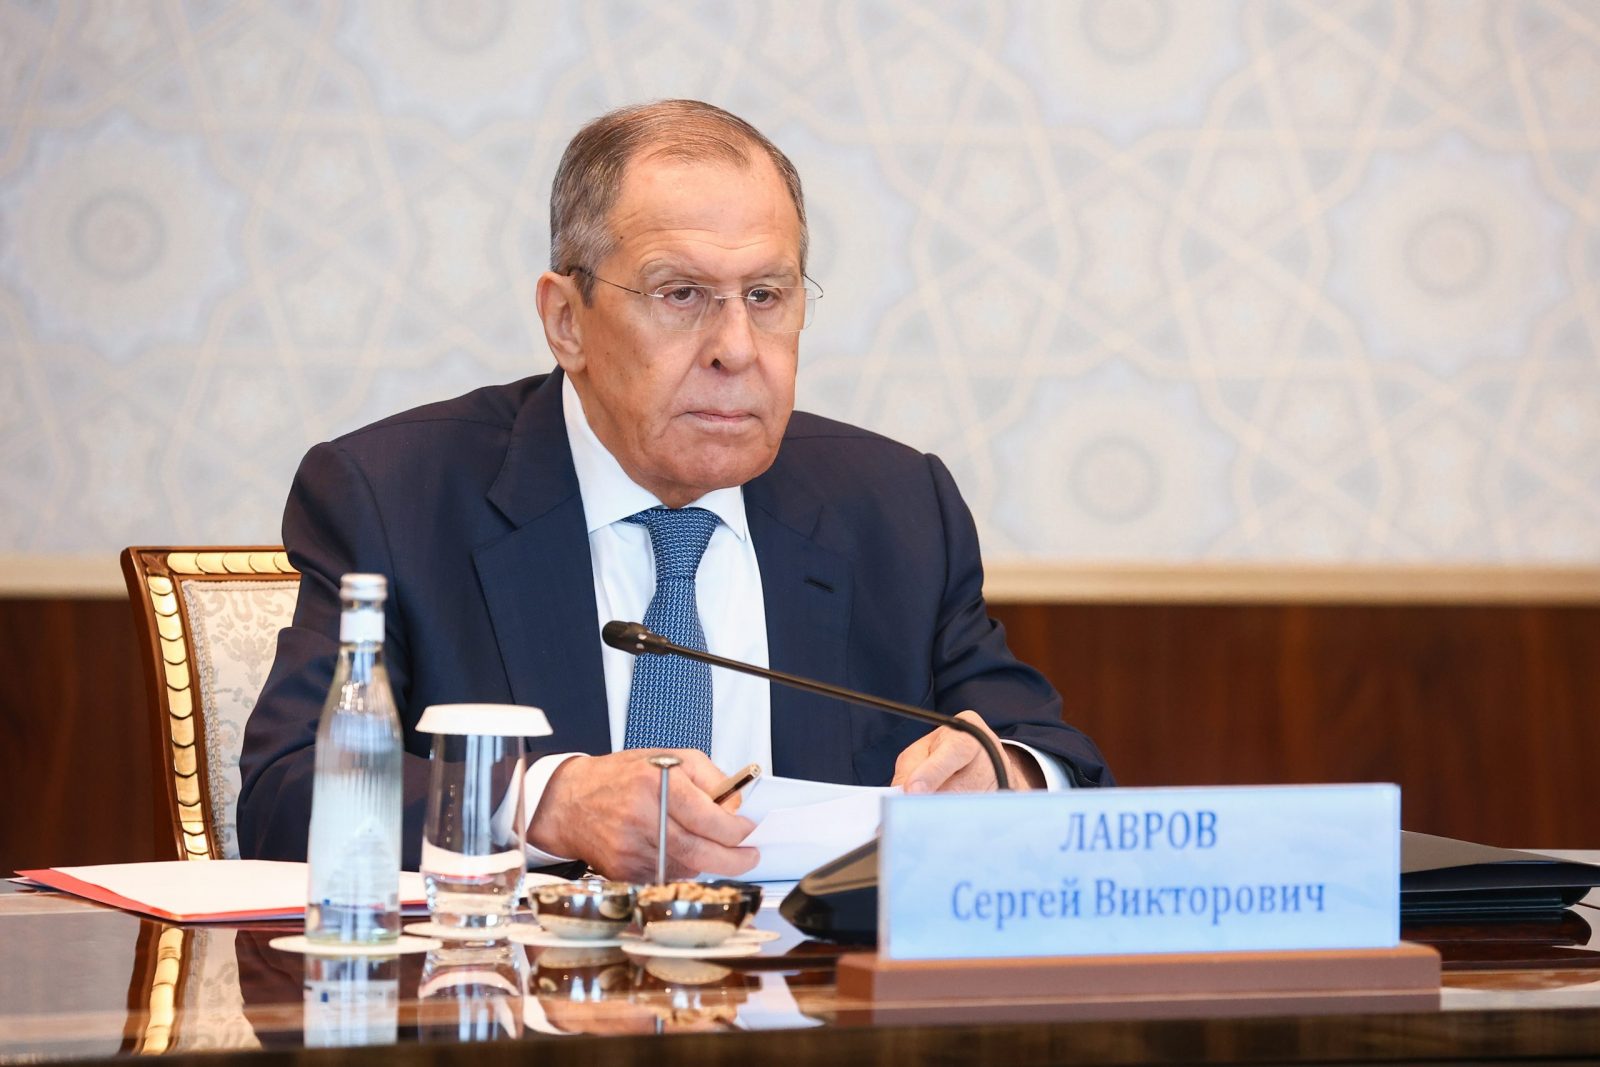 epa10572183 A handout photo made available by Russian Foreign Ministry Press Service shows Russian Foreign Minister Sergei Lavrov attends the Council of Foreign Ministers of the Commonwealth of Independent States (CIS) in Samarkand, Uzbekistan, 14 April 2023.  EPA/RUSSIAN FOREIGN MINISTRY PRESS SERVICE / HANDOUT  HANDOUT EDITORIAL USE ONLY/NO SALES